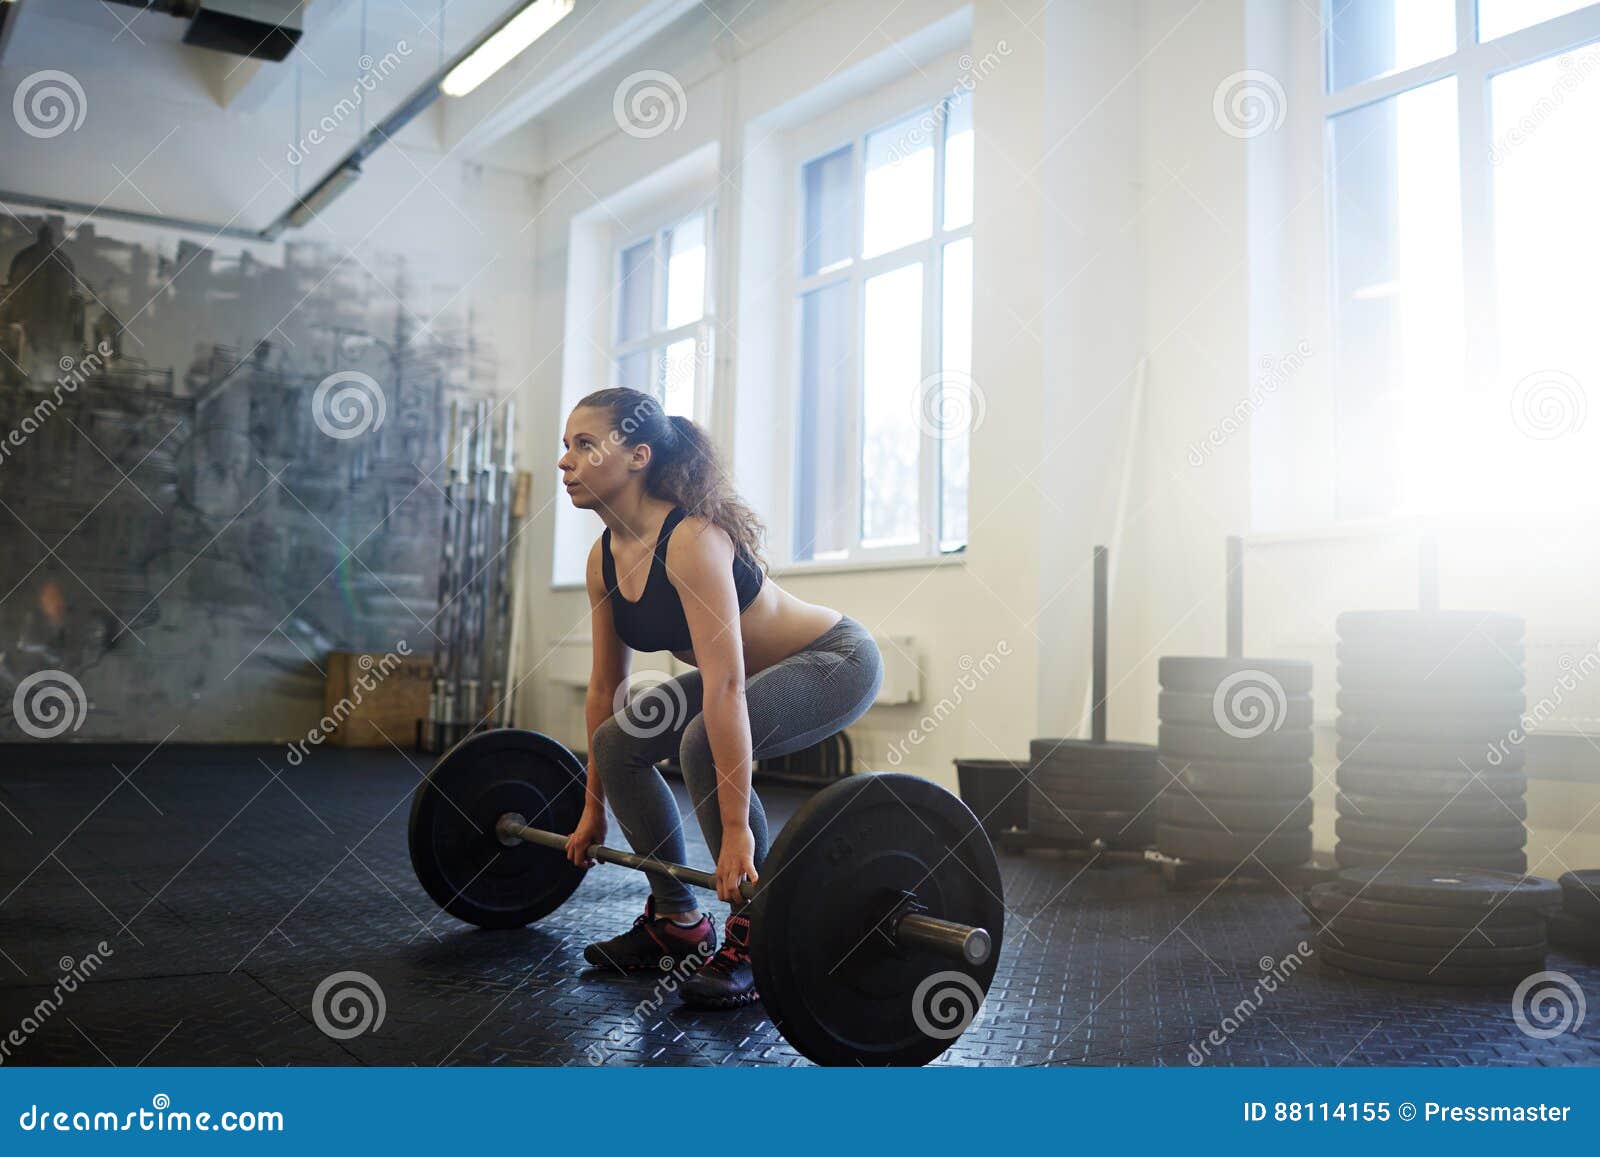 Lifting weight in gym stock image. Image of active, strong - 88114155